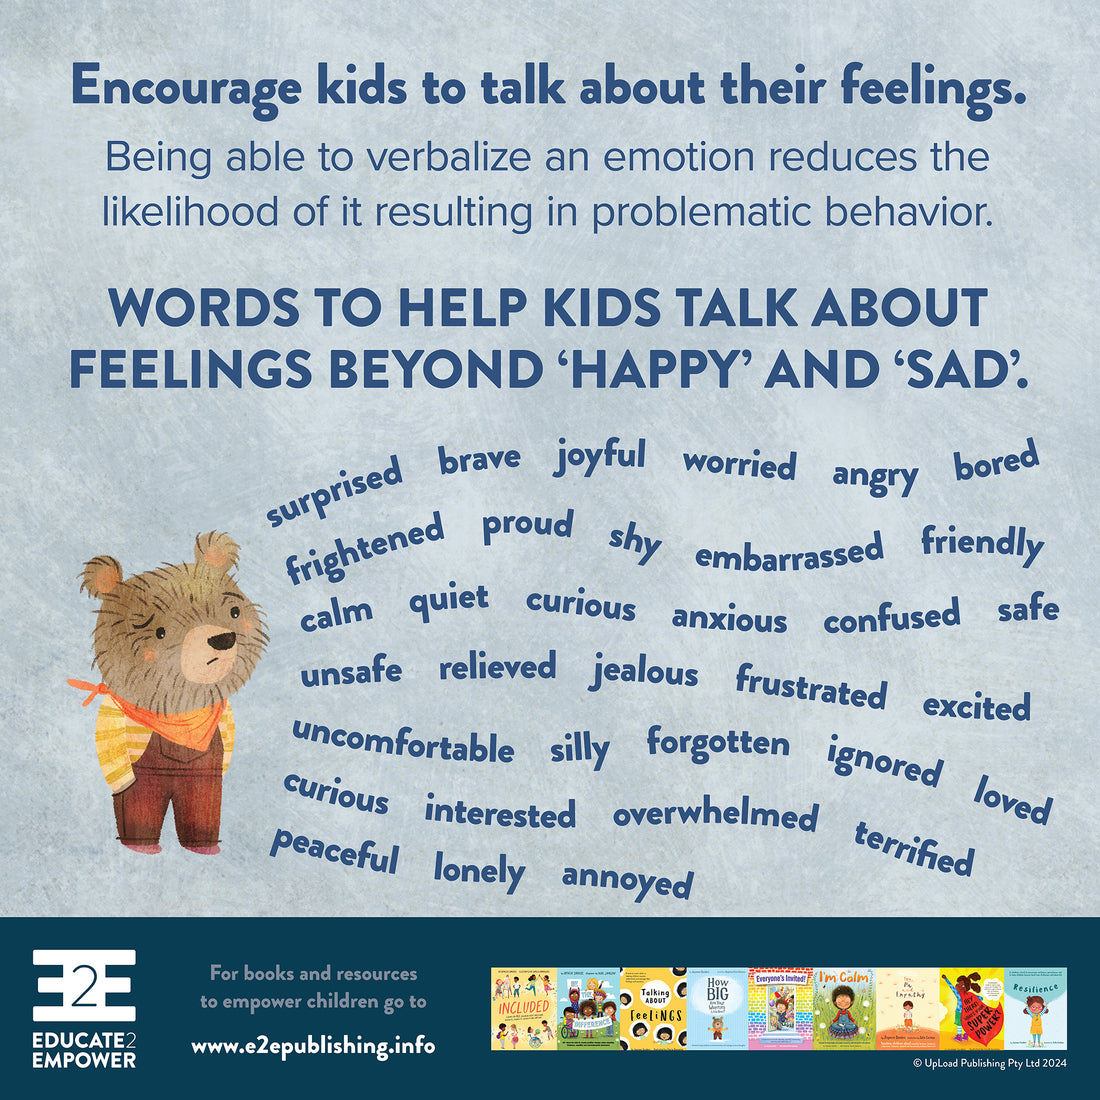 Encourage kids to talk about their feelings.